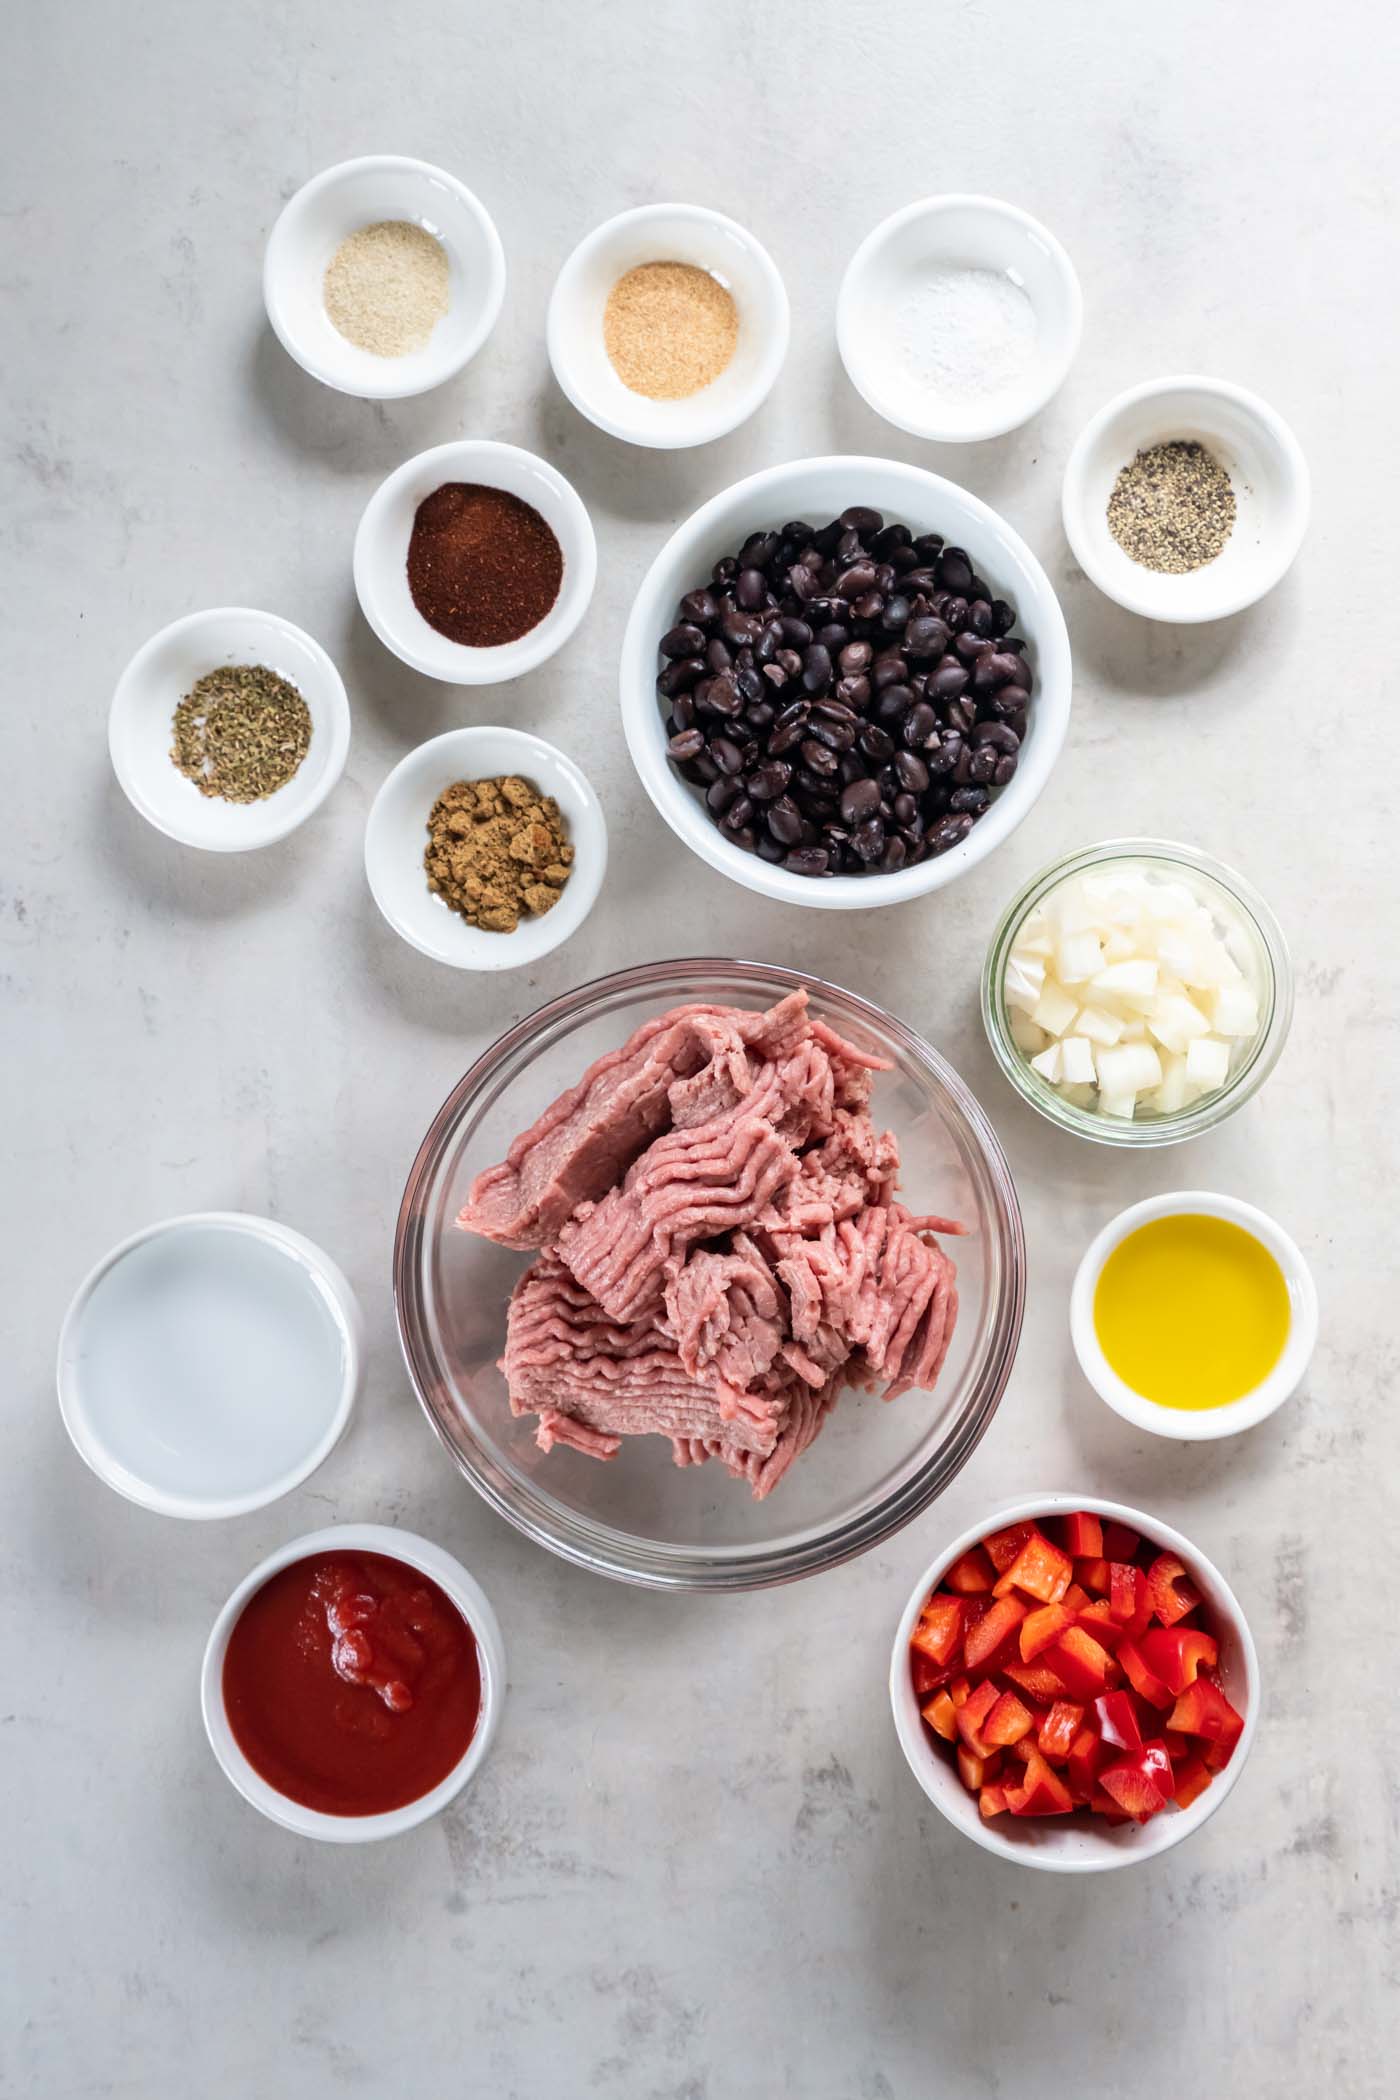 Ingredients for turkey tacos recipe.